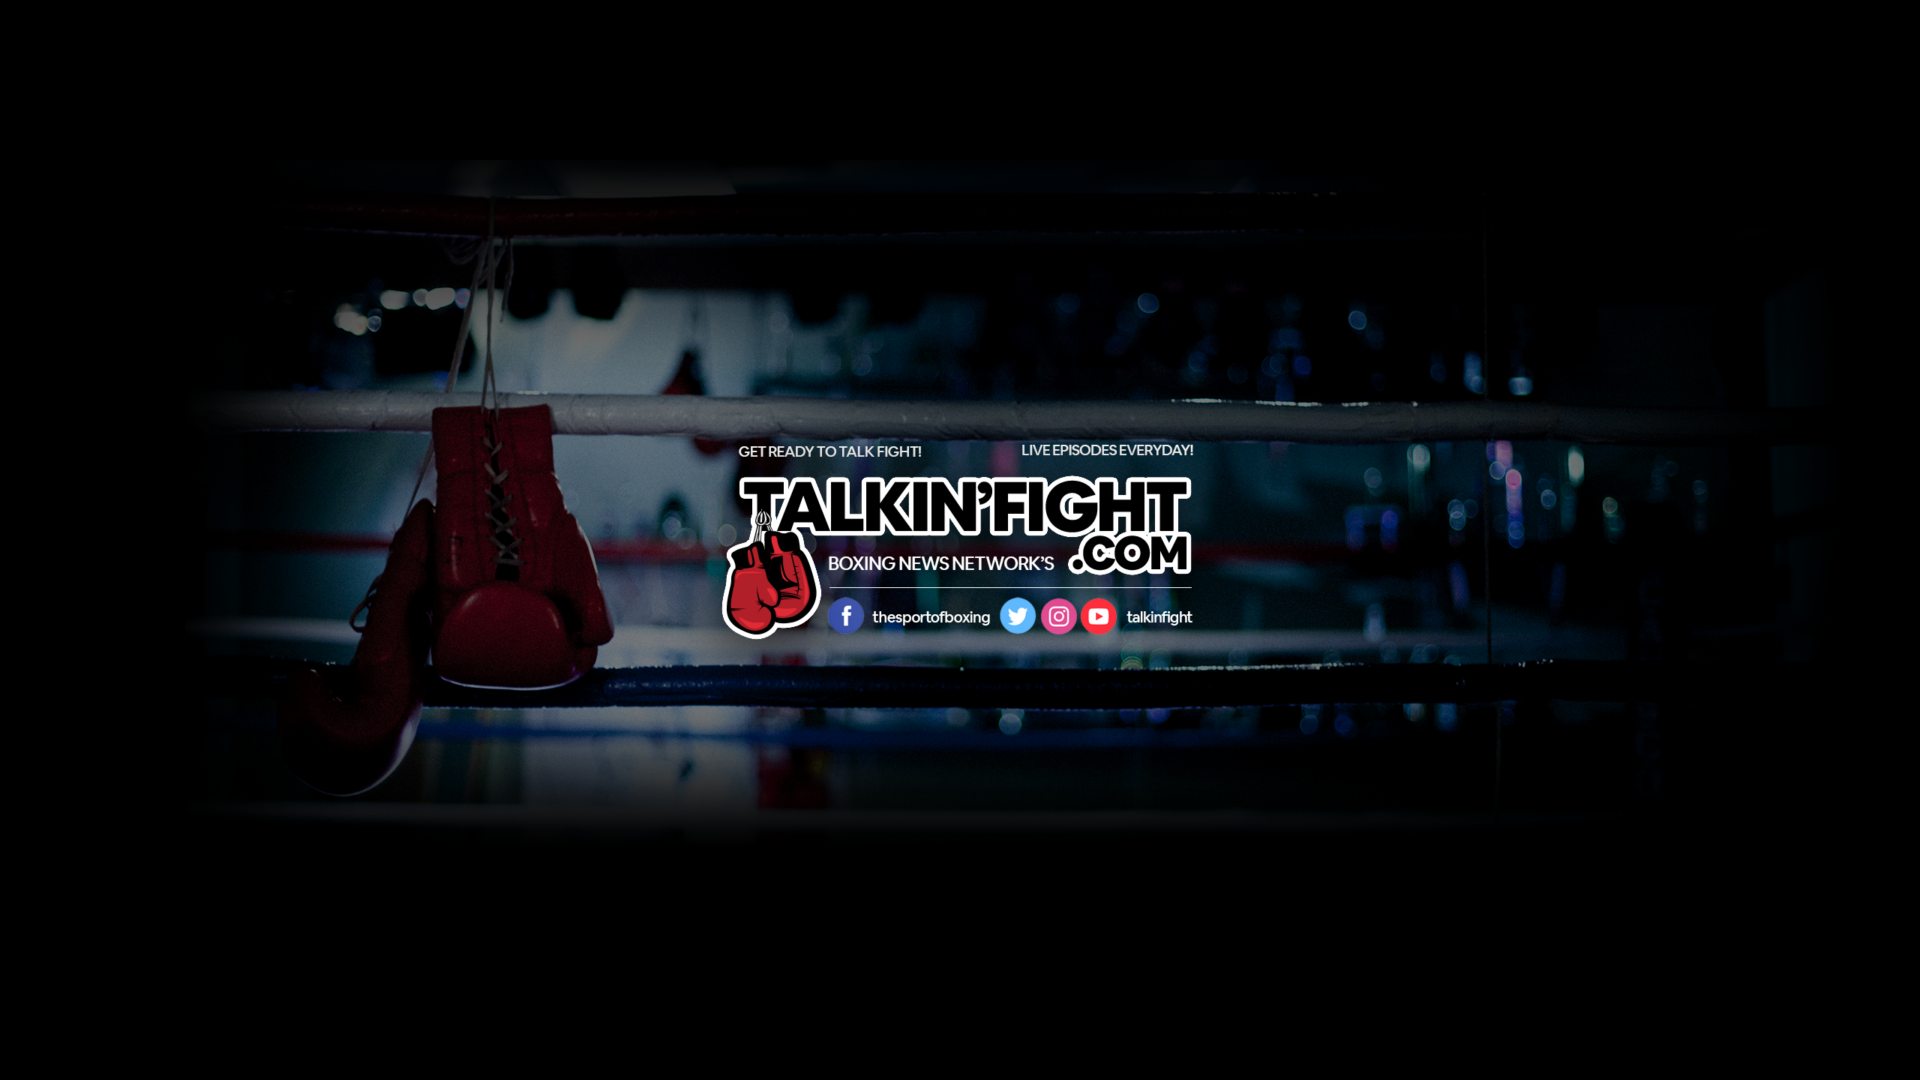 Talkin' Fight YouTube channel reaching milestone of 4000 watched hours with boxing news and updates